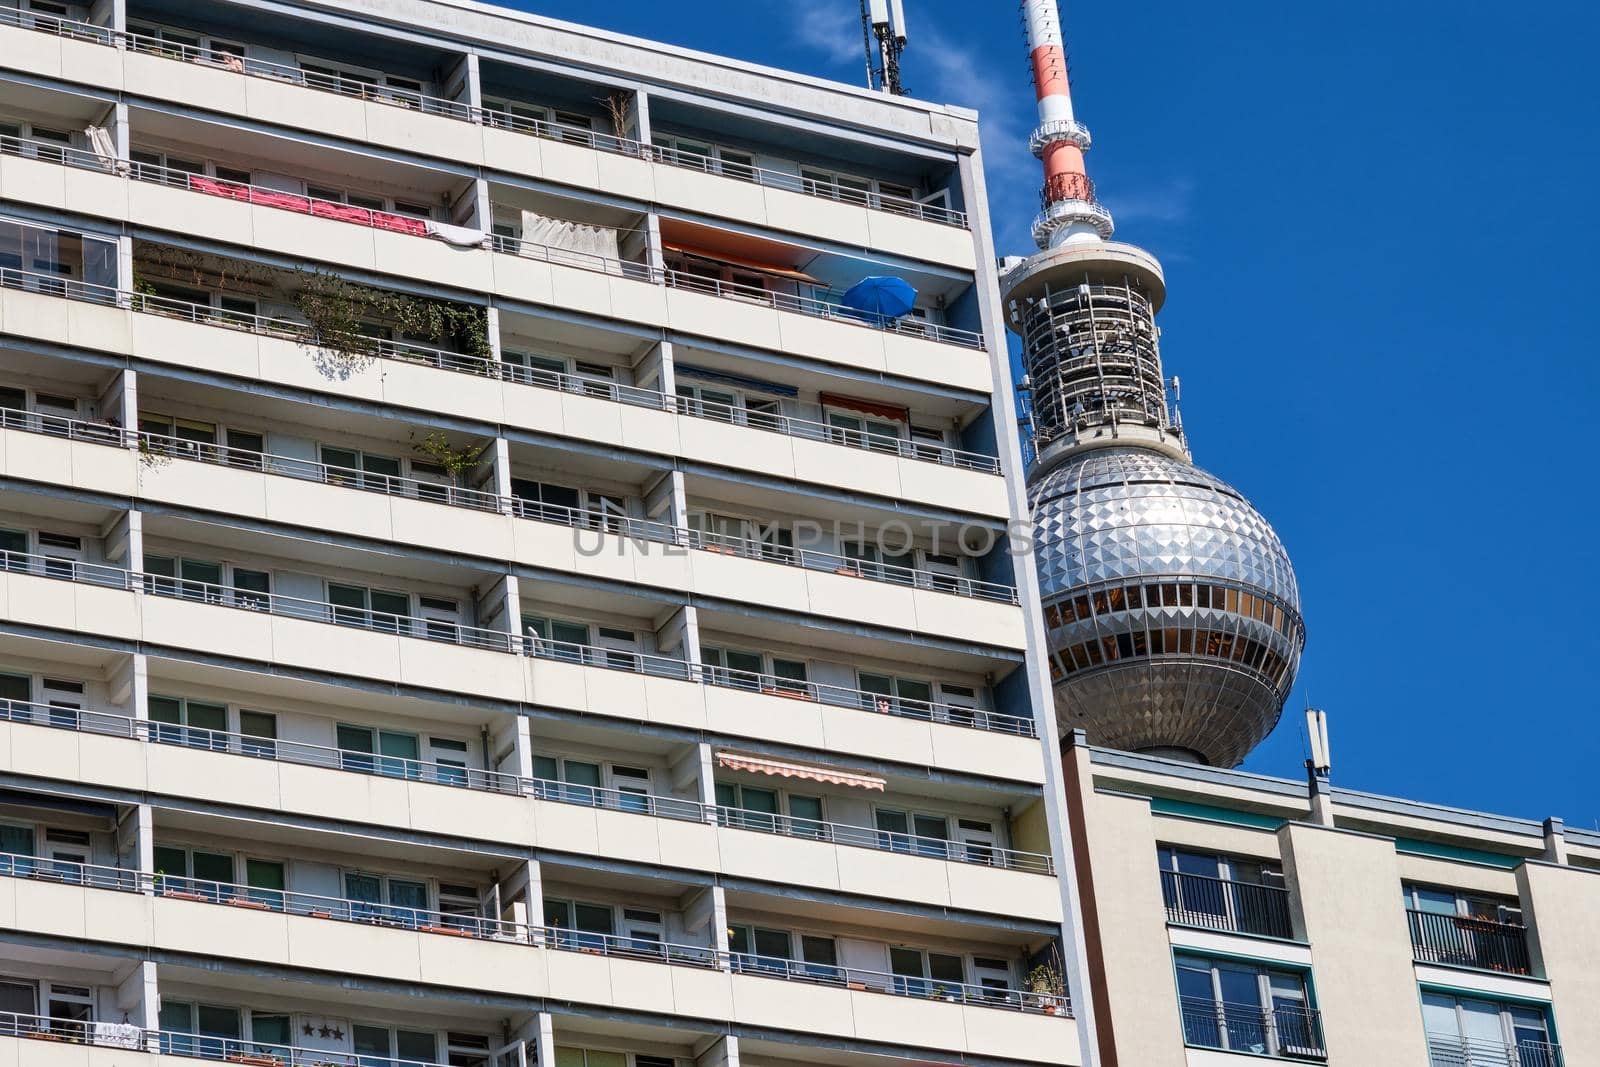 Subsidized housing building with the TV Tower of Berlin in the background